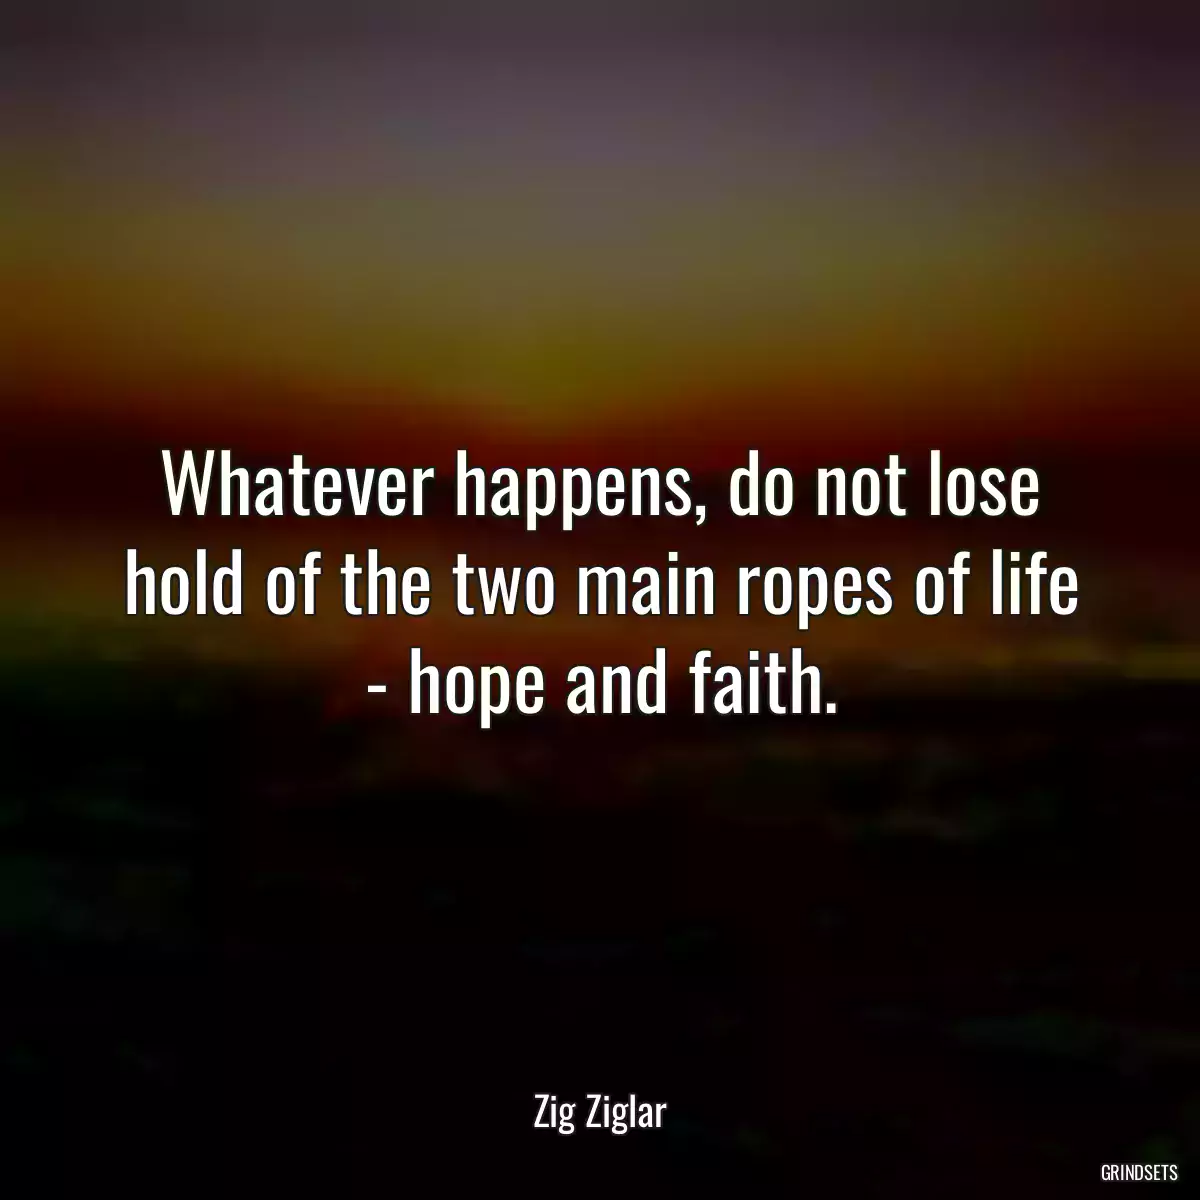 Whatever happens, do not lose hold of the two main ropes of life - hope and faith.